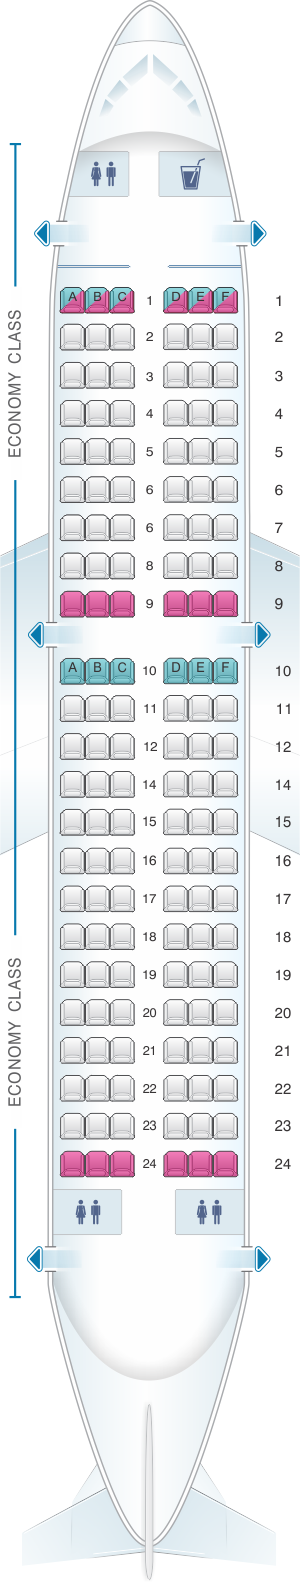 Seat map for Air Moldova Airbus A319